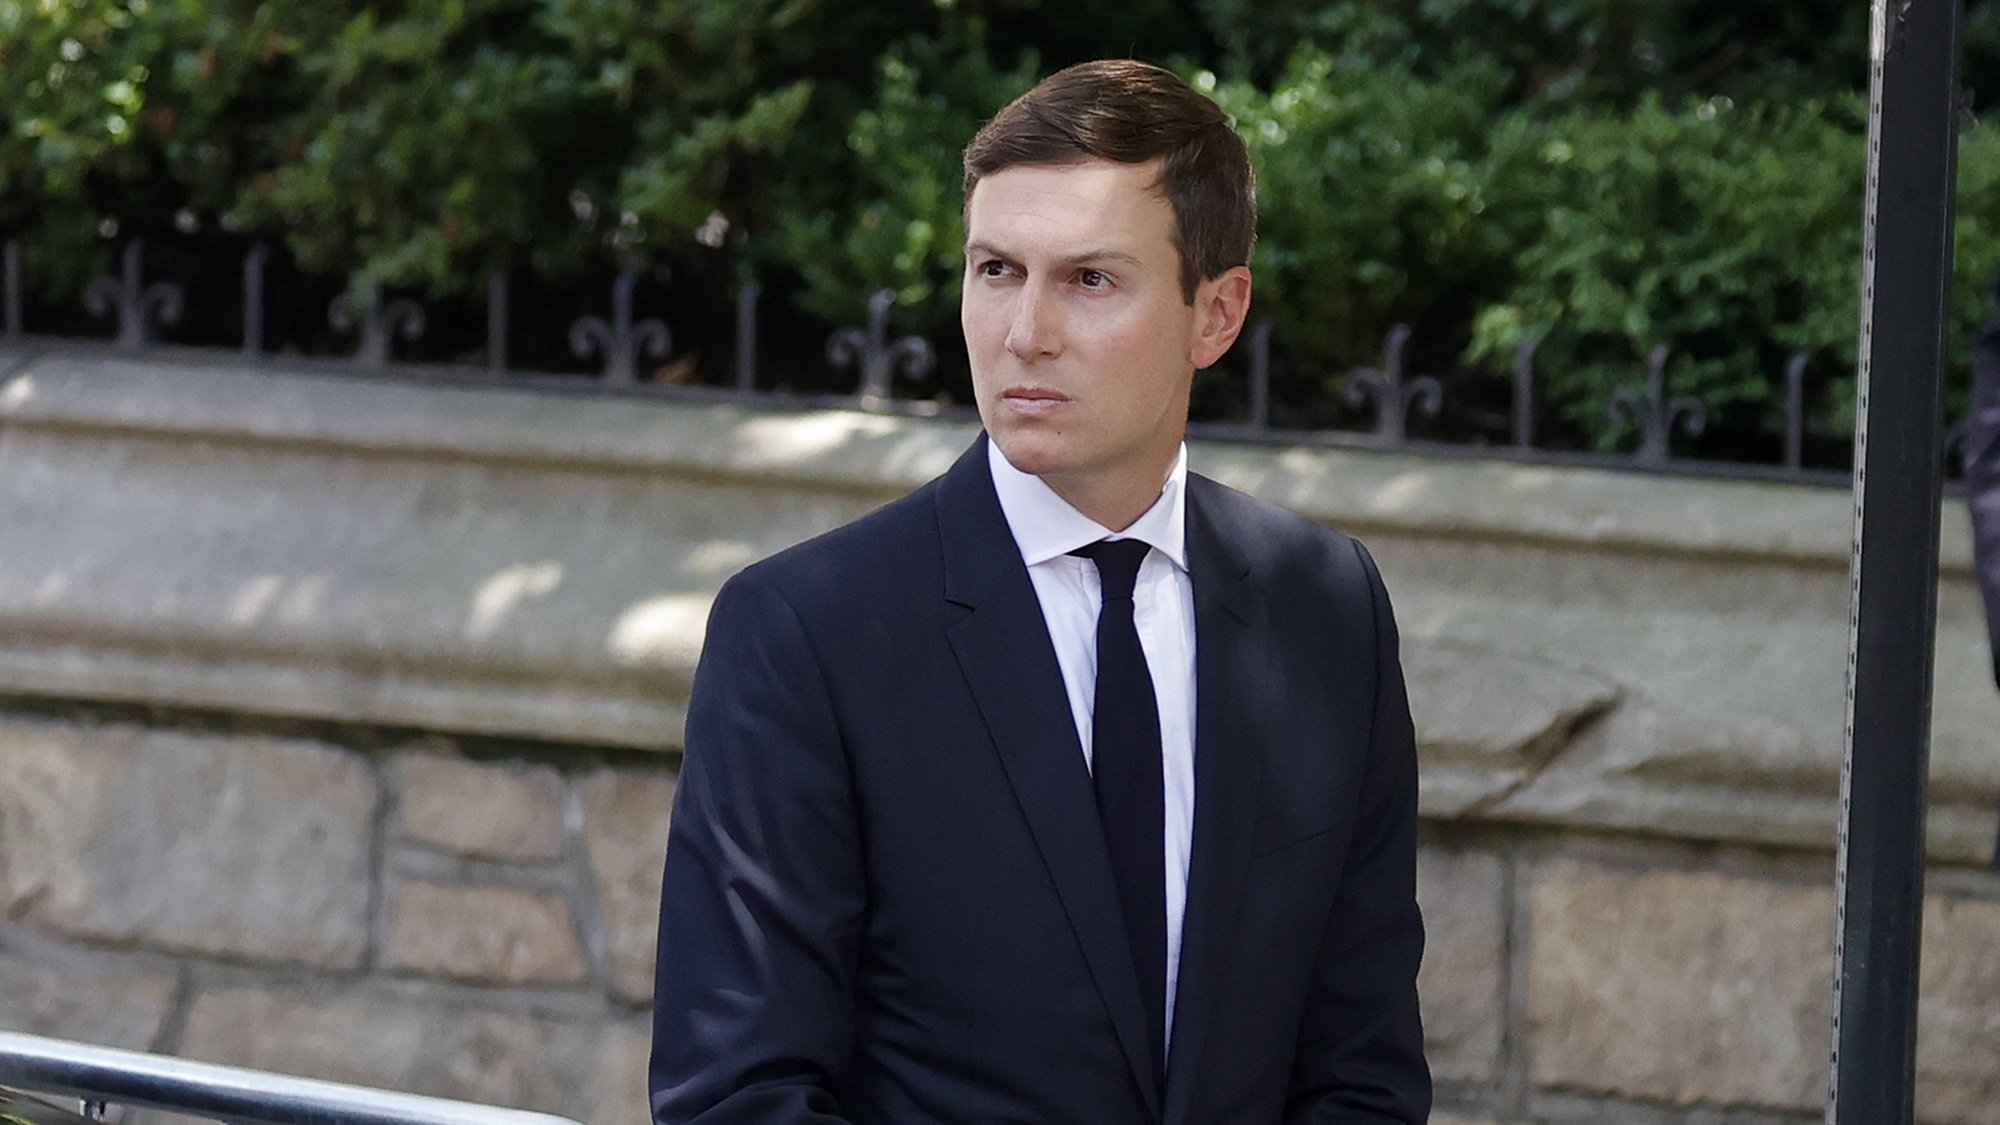 epa10083114 Jared Kushner (C) arrives for the funeral of his mother-in-law, Ivana Trump, the first wife of Former US President Donald Trump at St. Vincent Ferrer Roman Catholic Church in New York, New York, USA, 20 July 2022. Ivana Trump, the first wife of former President Donald Trump, has died at age 73 on 14 July 2022.  EPA/JASON SZENES